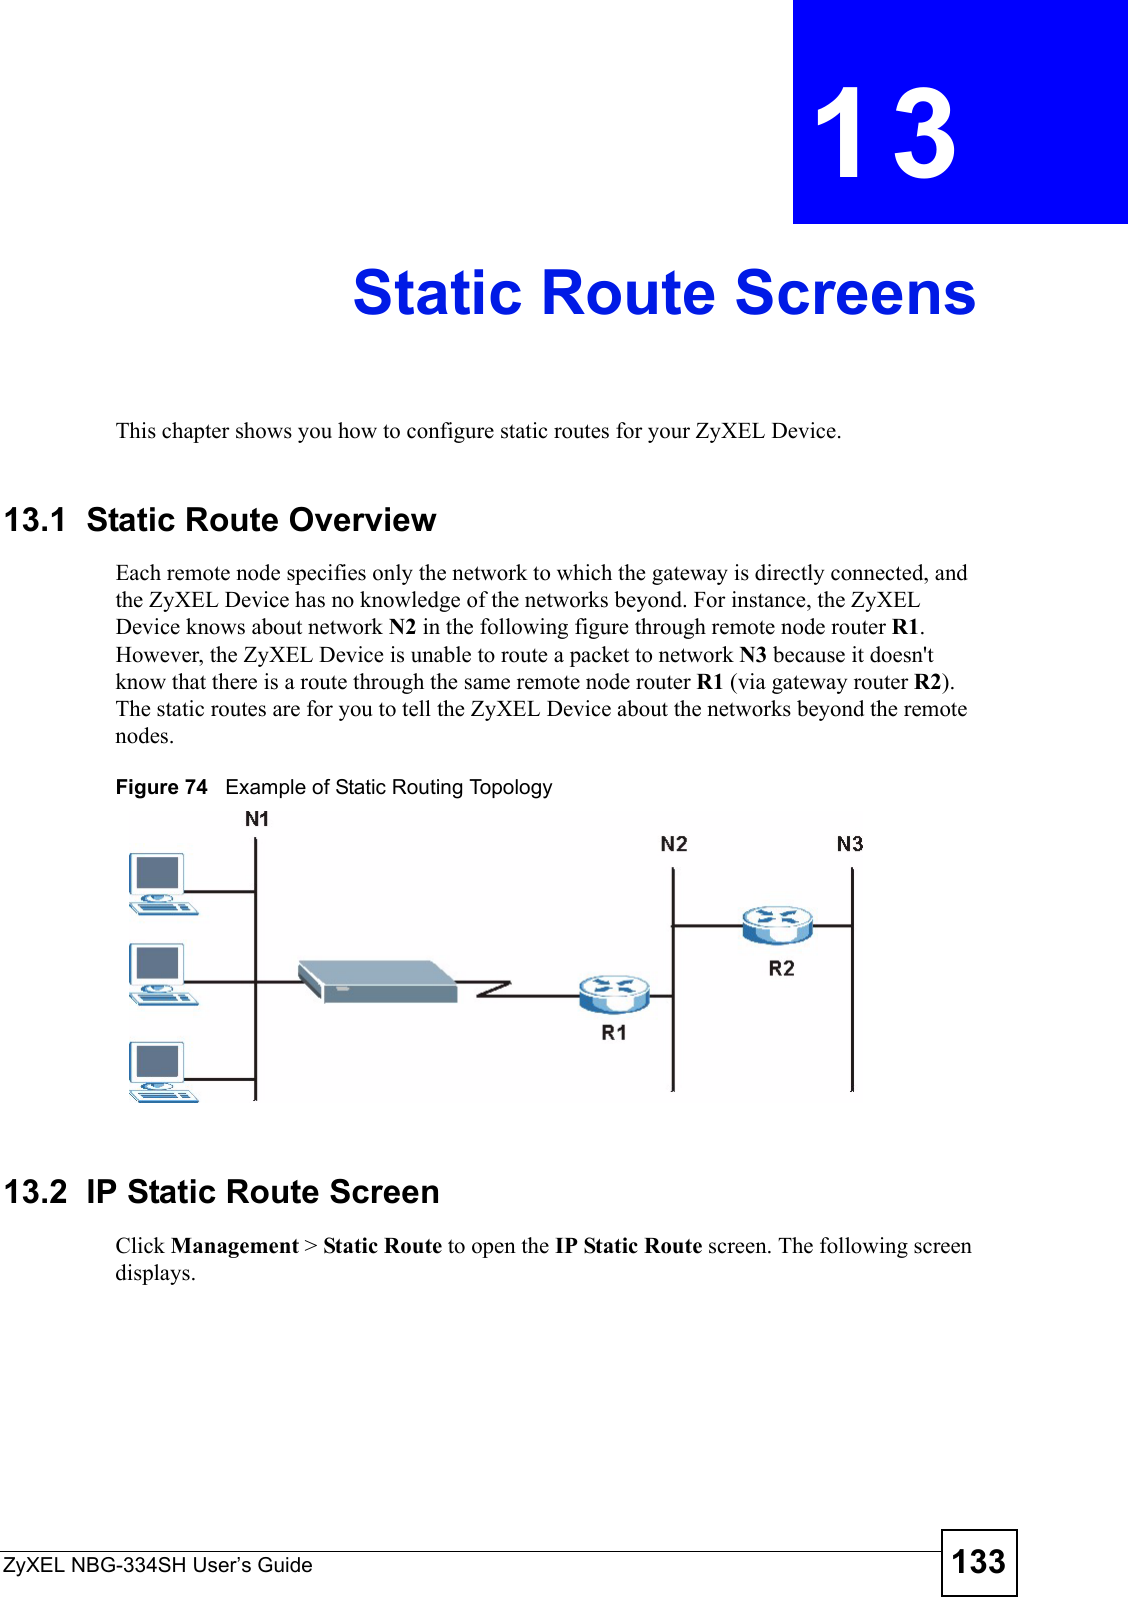 ZyXEL NBG-334SH User’s Guide 133CHAPTER  13 Static Route ScreensThis chapter shows you how to configure static routes for your ZyXEL Device.13.1  Static Route OverviewEach remote node specifies only the network to which the gateway is directly connected, and the ZyXEL Device has no knowledge of the networks beyond. For instance, the ZyXEL Device knows about network N2 in the following figure through remote node router R1. However, the ZyXEL Device is unable to route a packet to network N3 because it doesn&apos;t know that there is a route through the same remote node router R1 (via gateway router R2). The static routes are for you to tell the ZyXEL Device about the networks beyond the remote nodes.Figure 74   Example of Static Routing Topology13.2  IP Static Route ScreenClick Management &gt; Static Route to open the IP Static Route screen. The following screen displays.